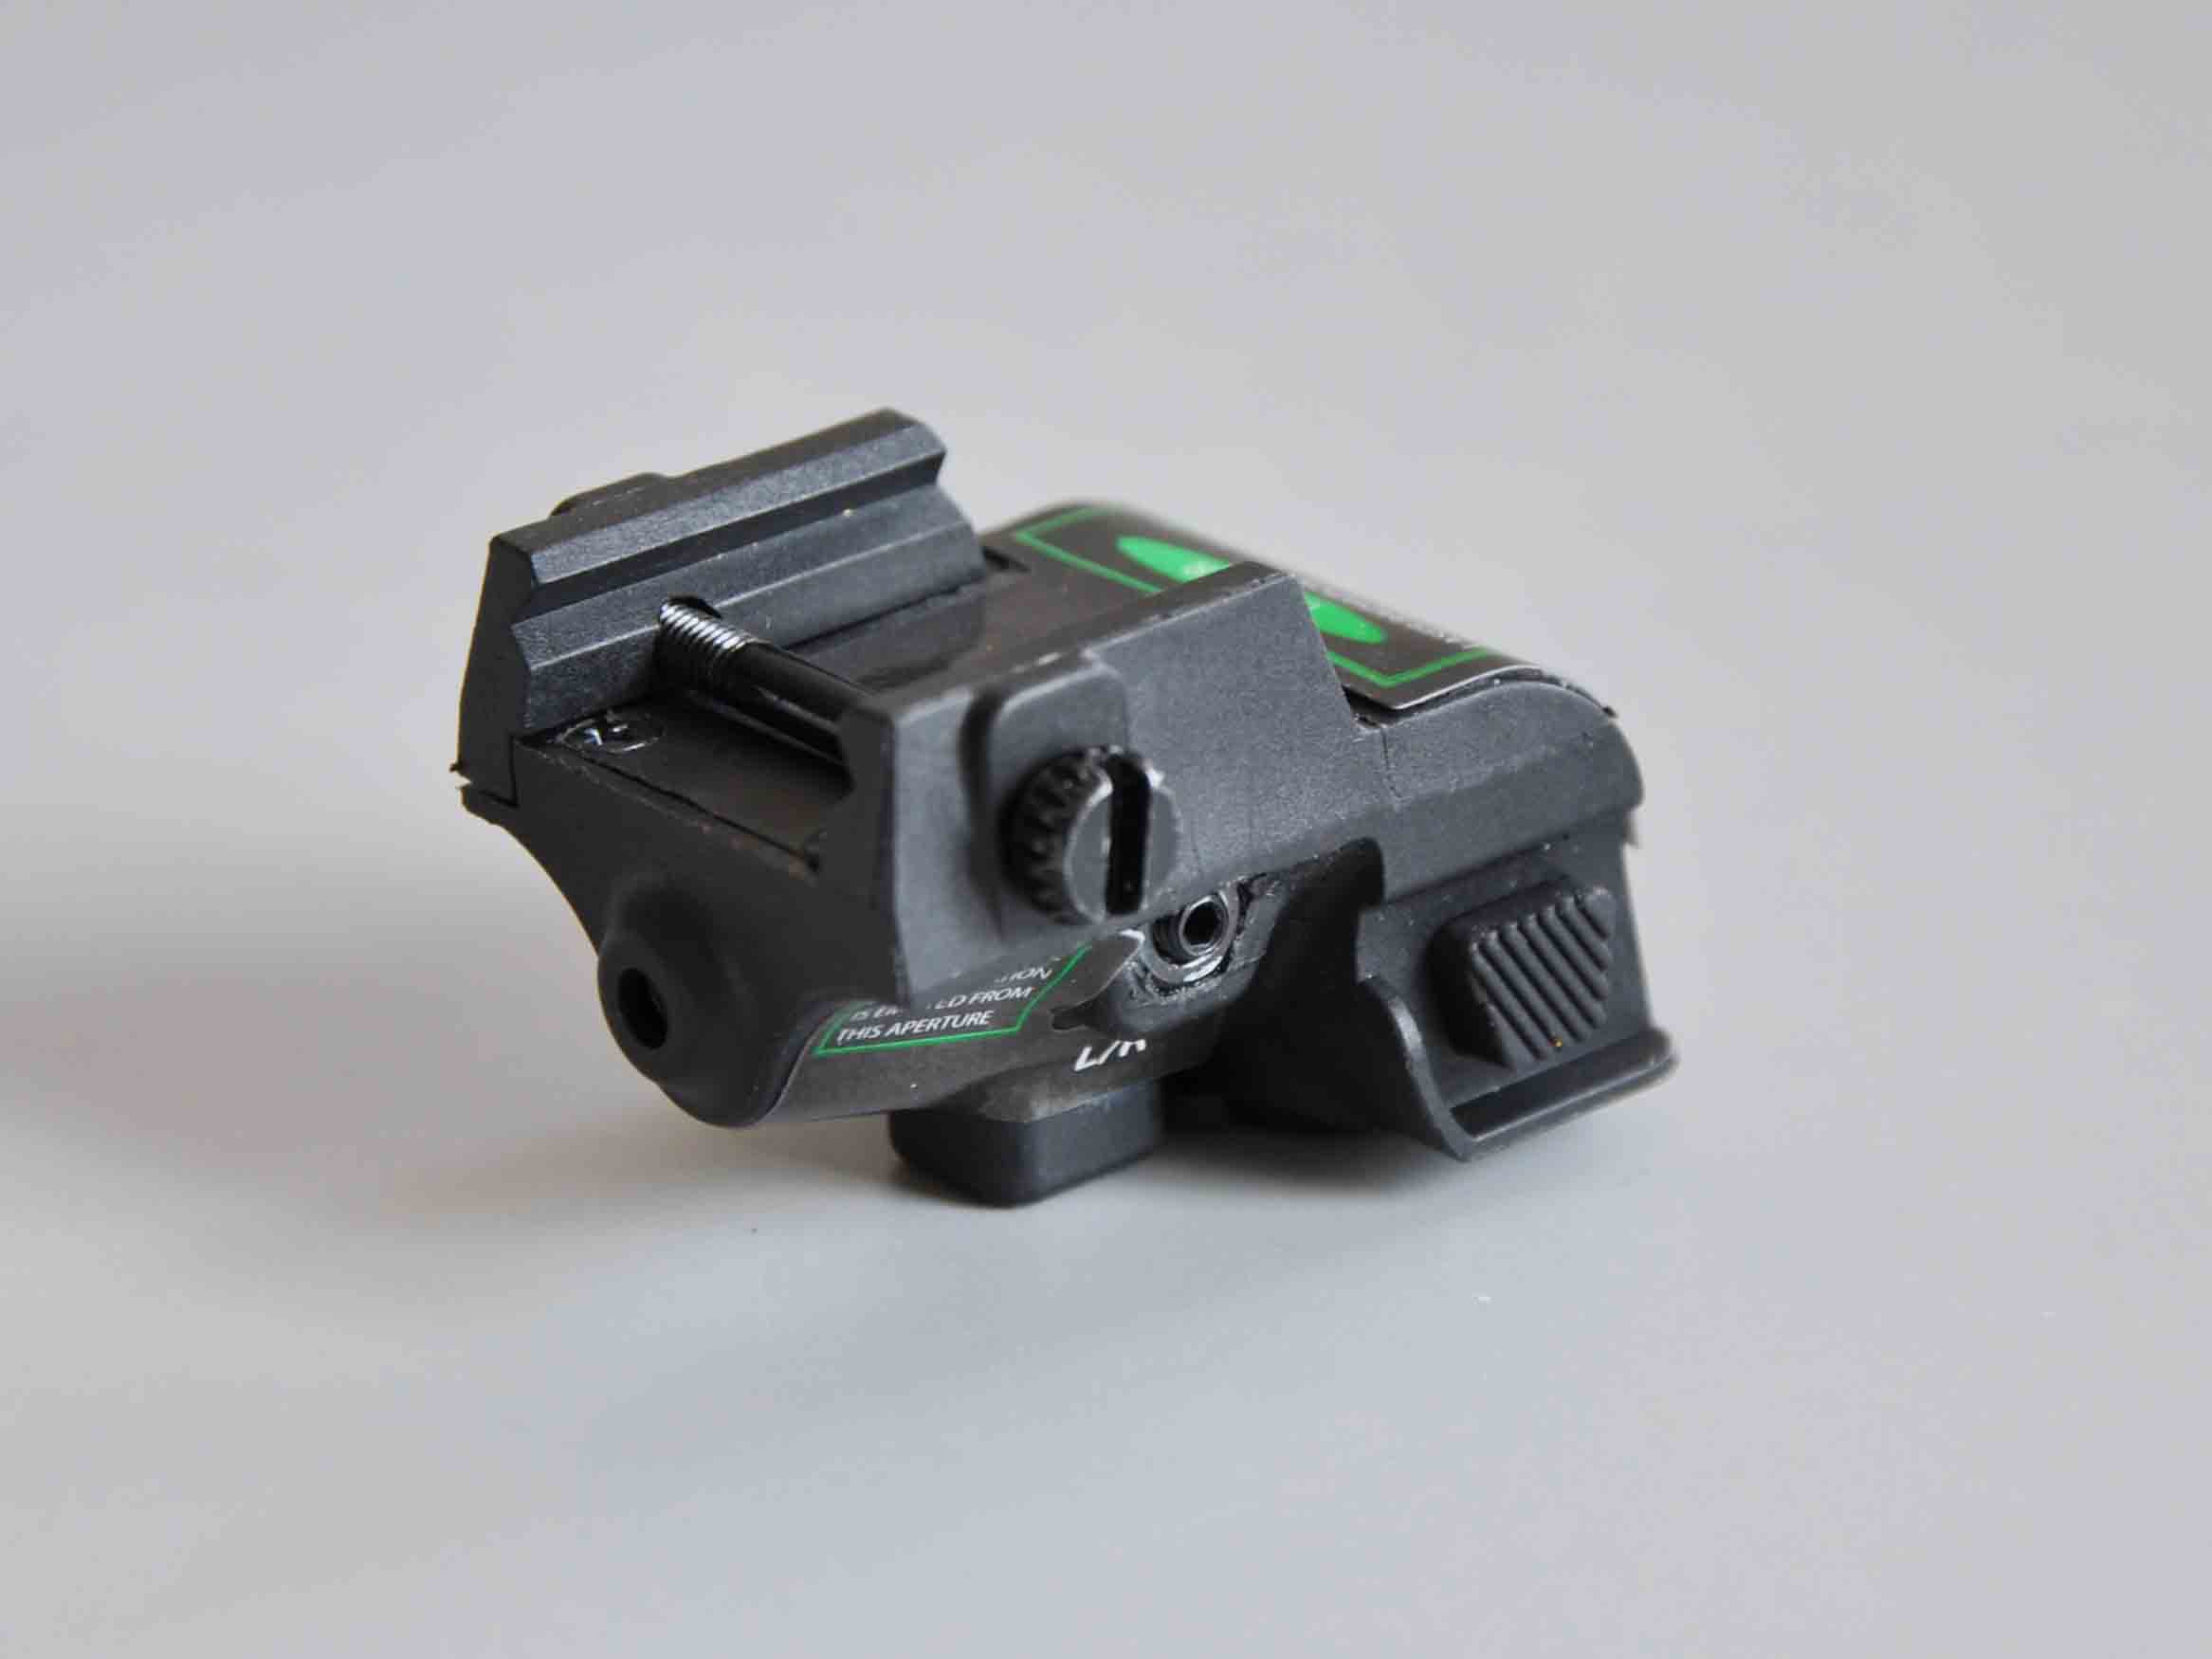 Firearm Picatinny Laser Sight Rechargeable Compact Green Laser Sight for Pistols Handguns